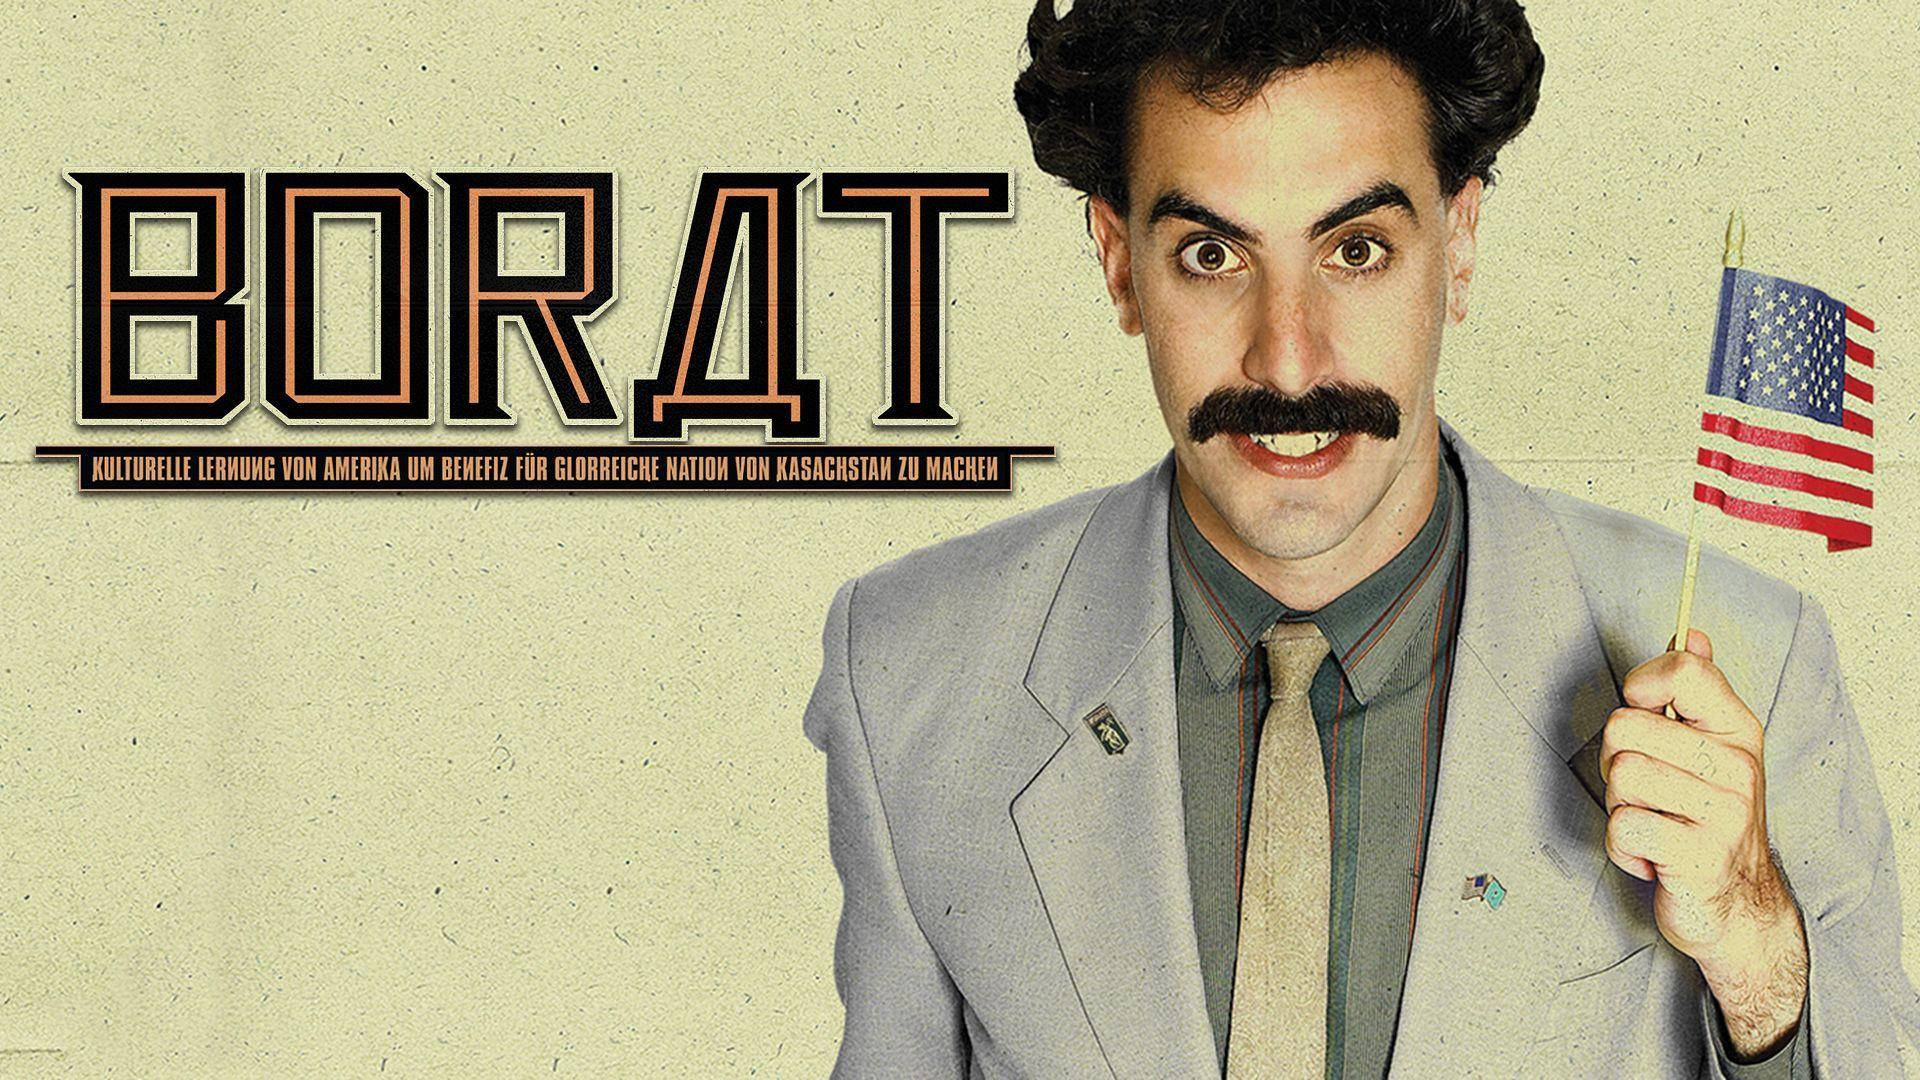 Sachabaron Cohen Borat Filmaffisch. (note: This Is The Literal Translation Of The Sentence. In Swedish, It Is More Common To Simply Use The English Title Of The Movie, 